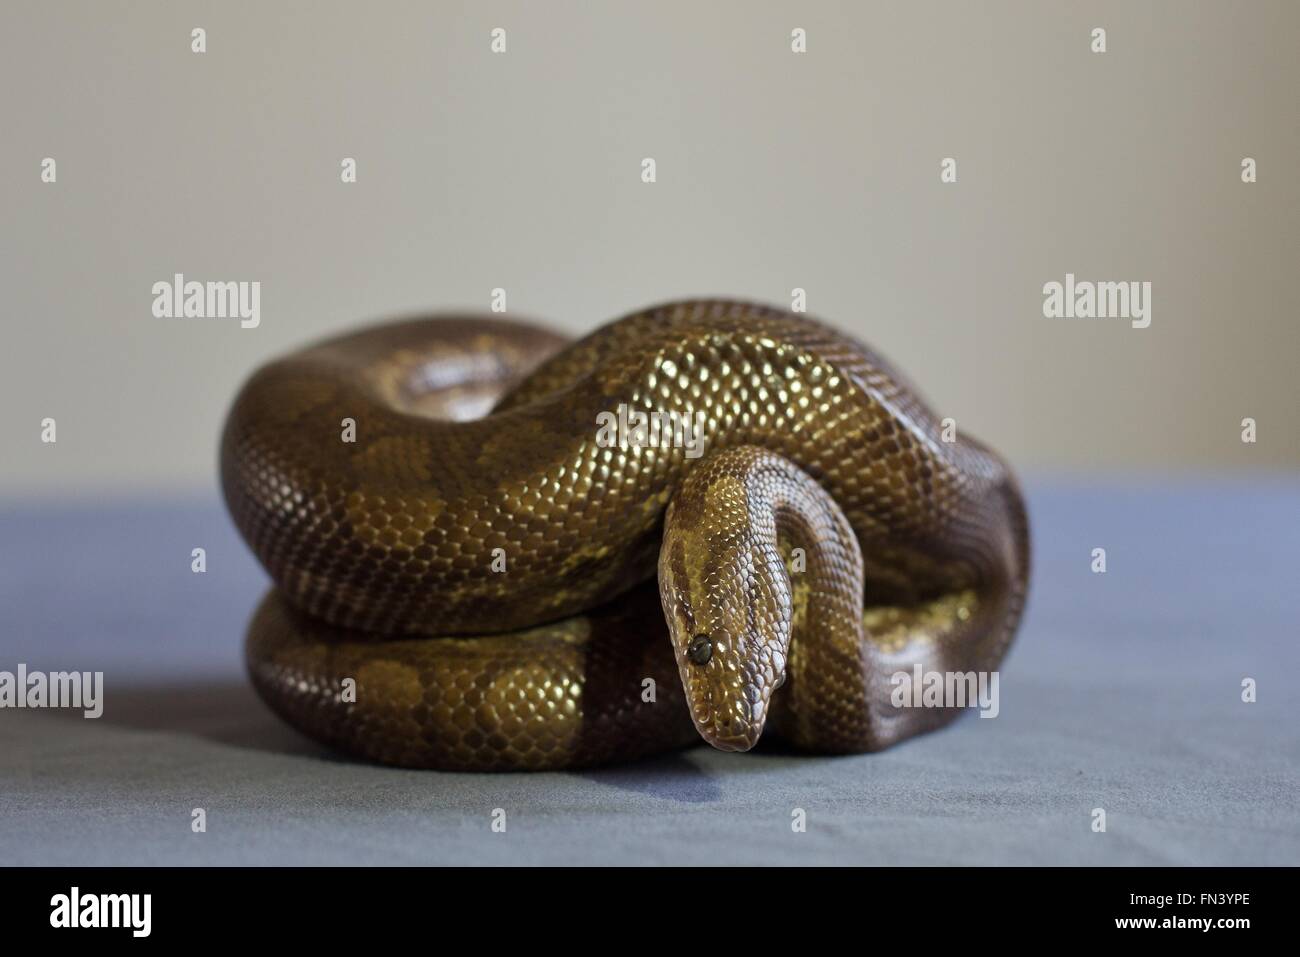 A rainbow boa constrictor snake curled up in a ball. Stock Photo